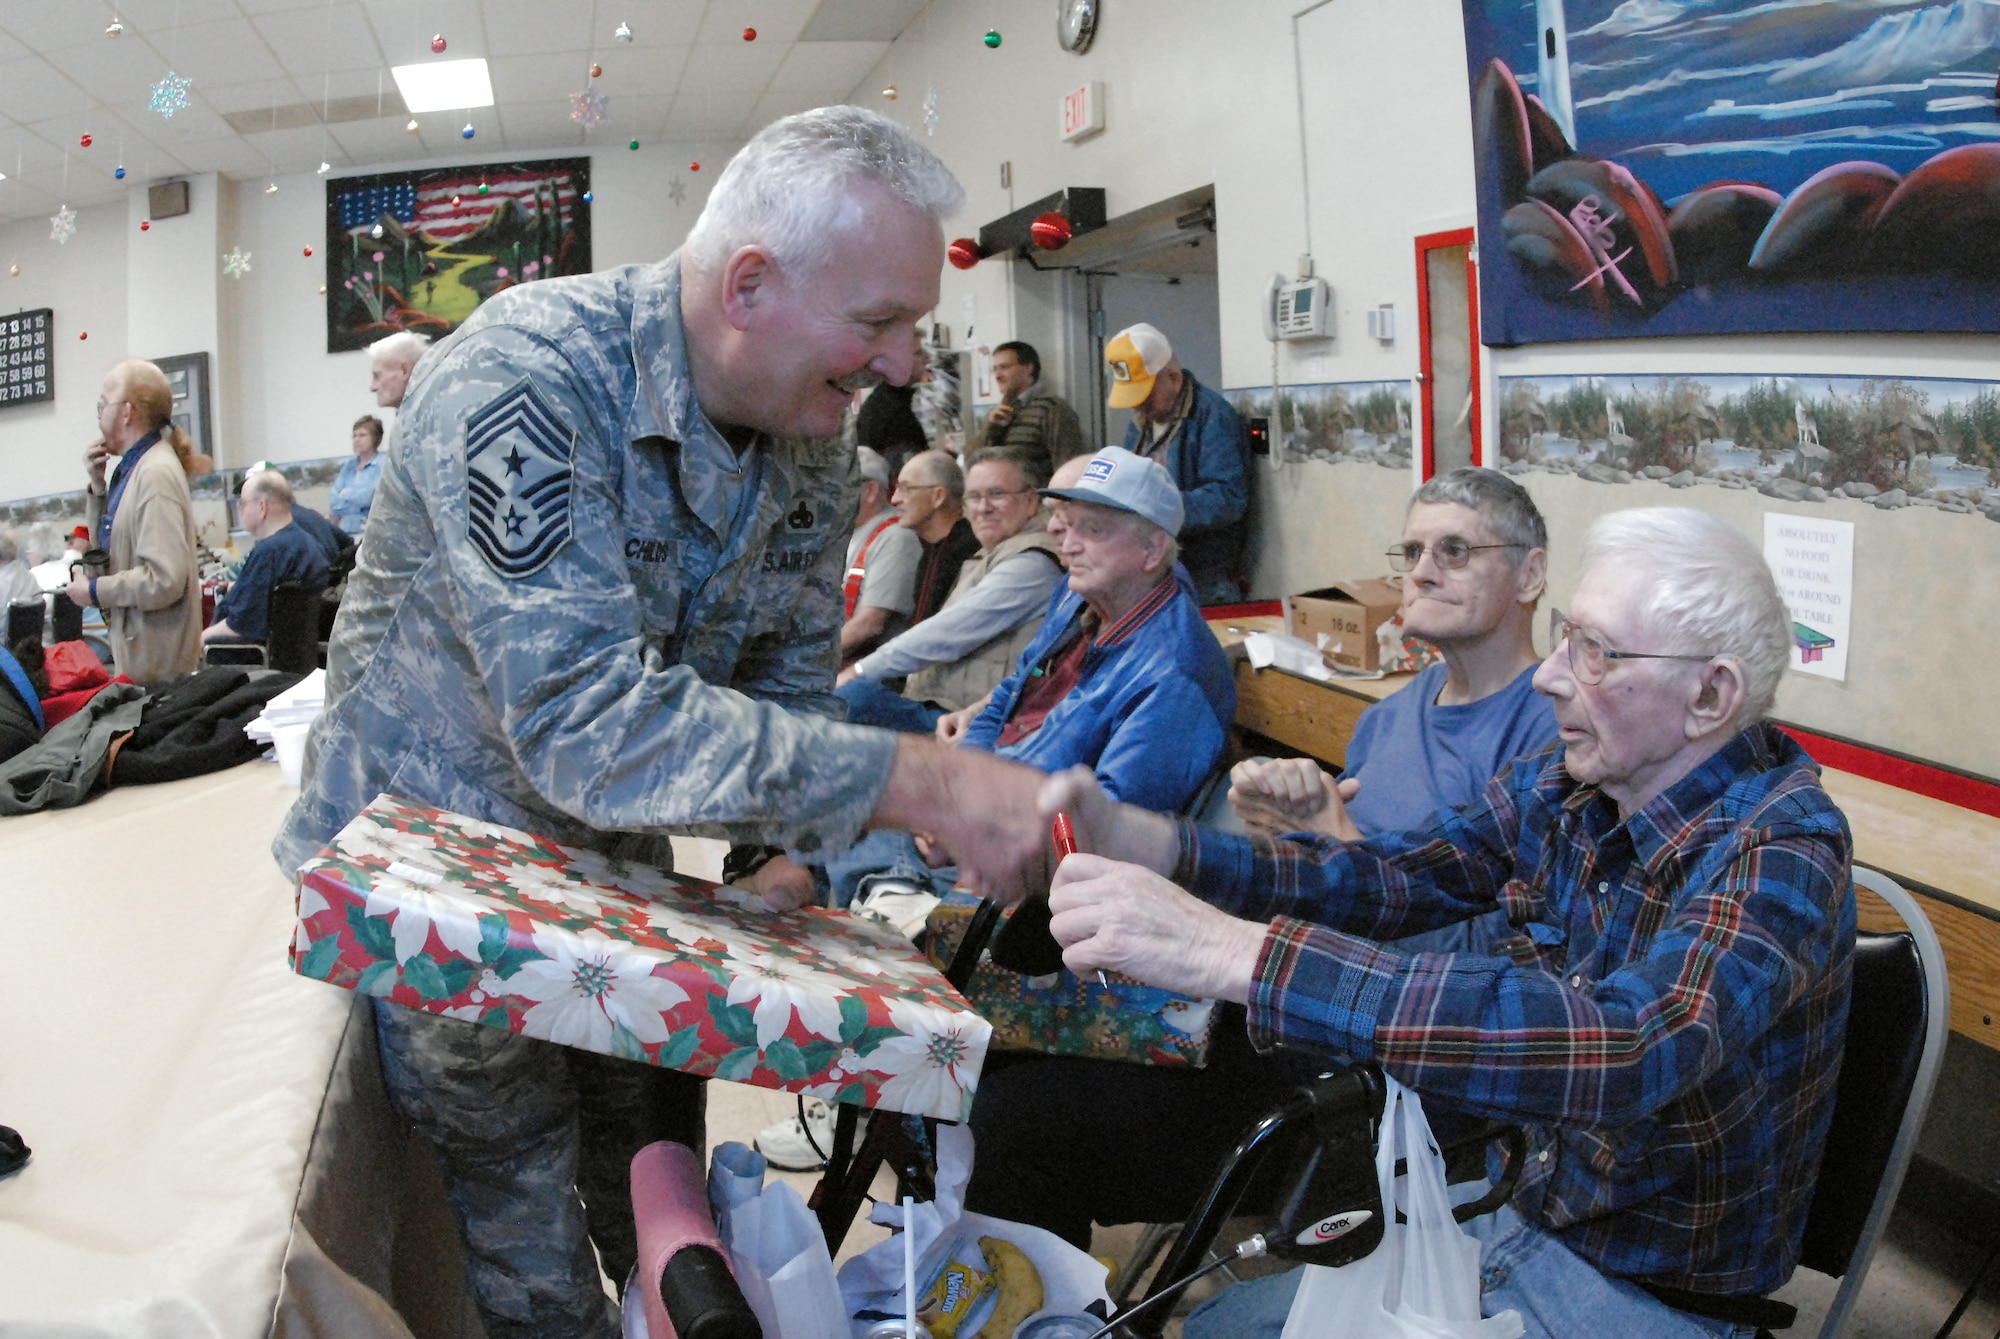 Chief Master Sgt. Brad Childs gives a Christmas gift to Army Korean War veteran Ervin Barfuss at the North Dakota Veteran's Nursing Home Dec. 10 in Lisbon, N.D. The gifts are given to veterans at the nursing home by the North Dakota Air and Army National Guard each December using funds raised through personal donations given by the North Dakota National Guard members. Chief Childs is the the 119th Wing command chief. (U.S. Air Force photo/Senior Master Sgt. David H. Lipp) 